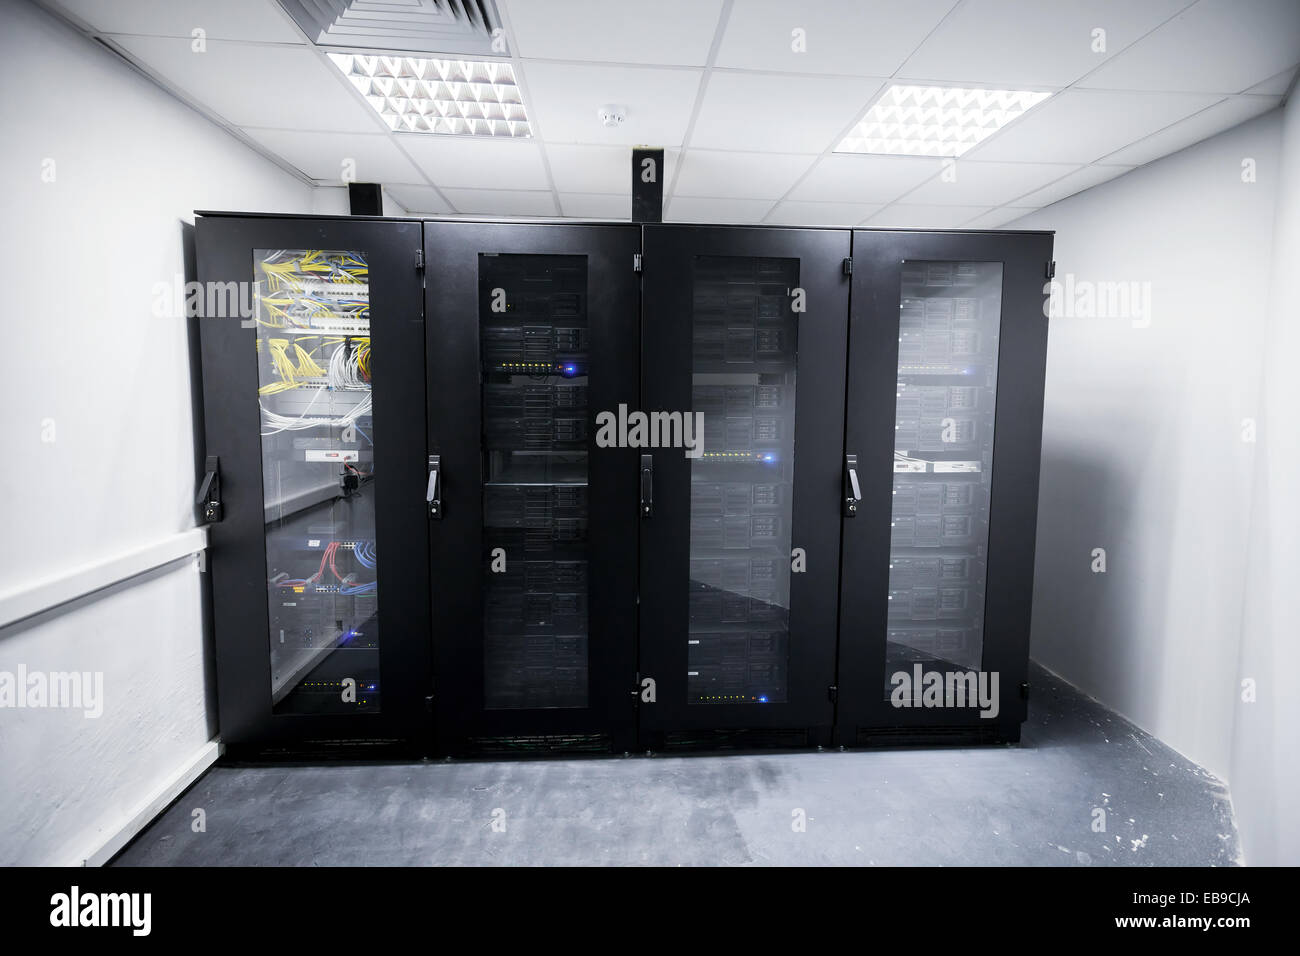 Server room interior with black metal computer cabinets Stock Photo